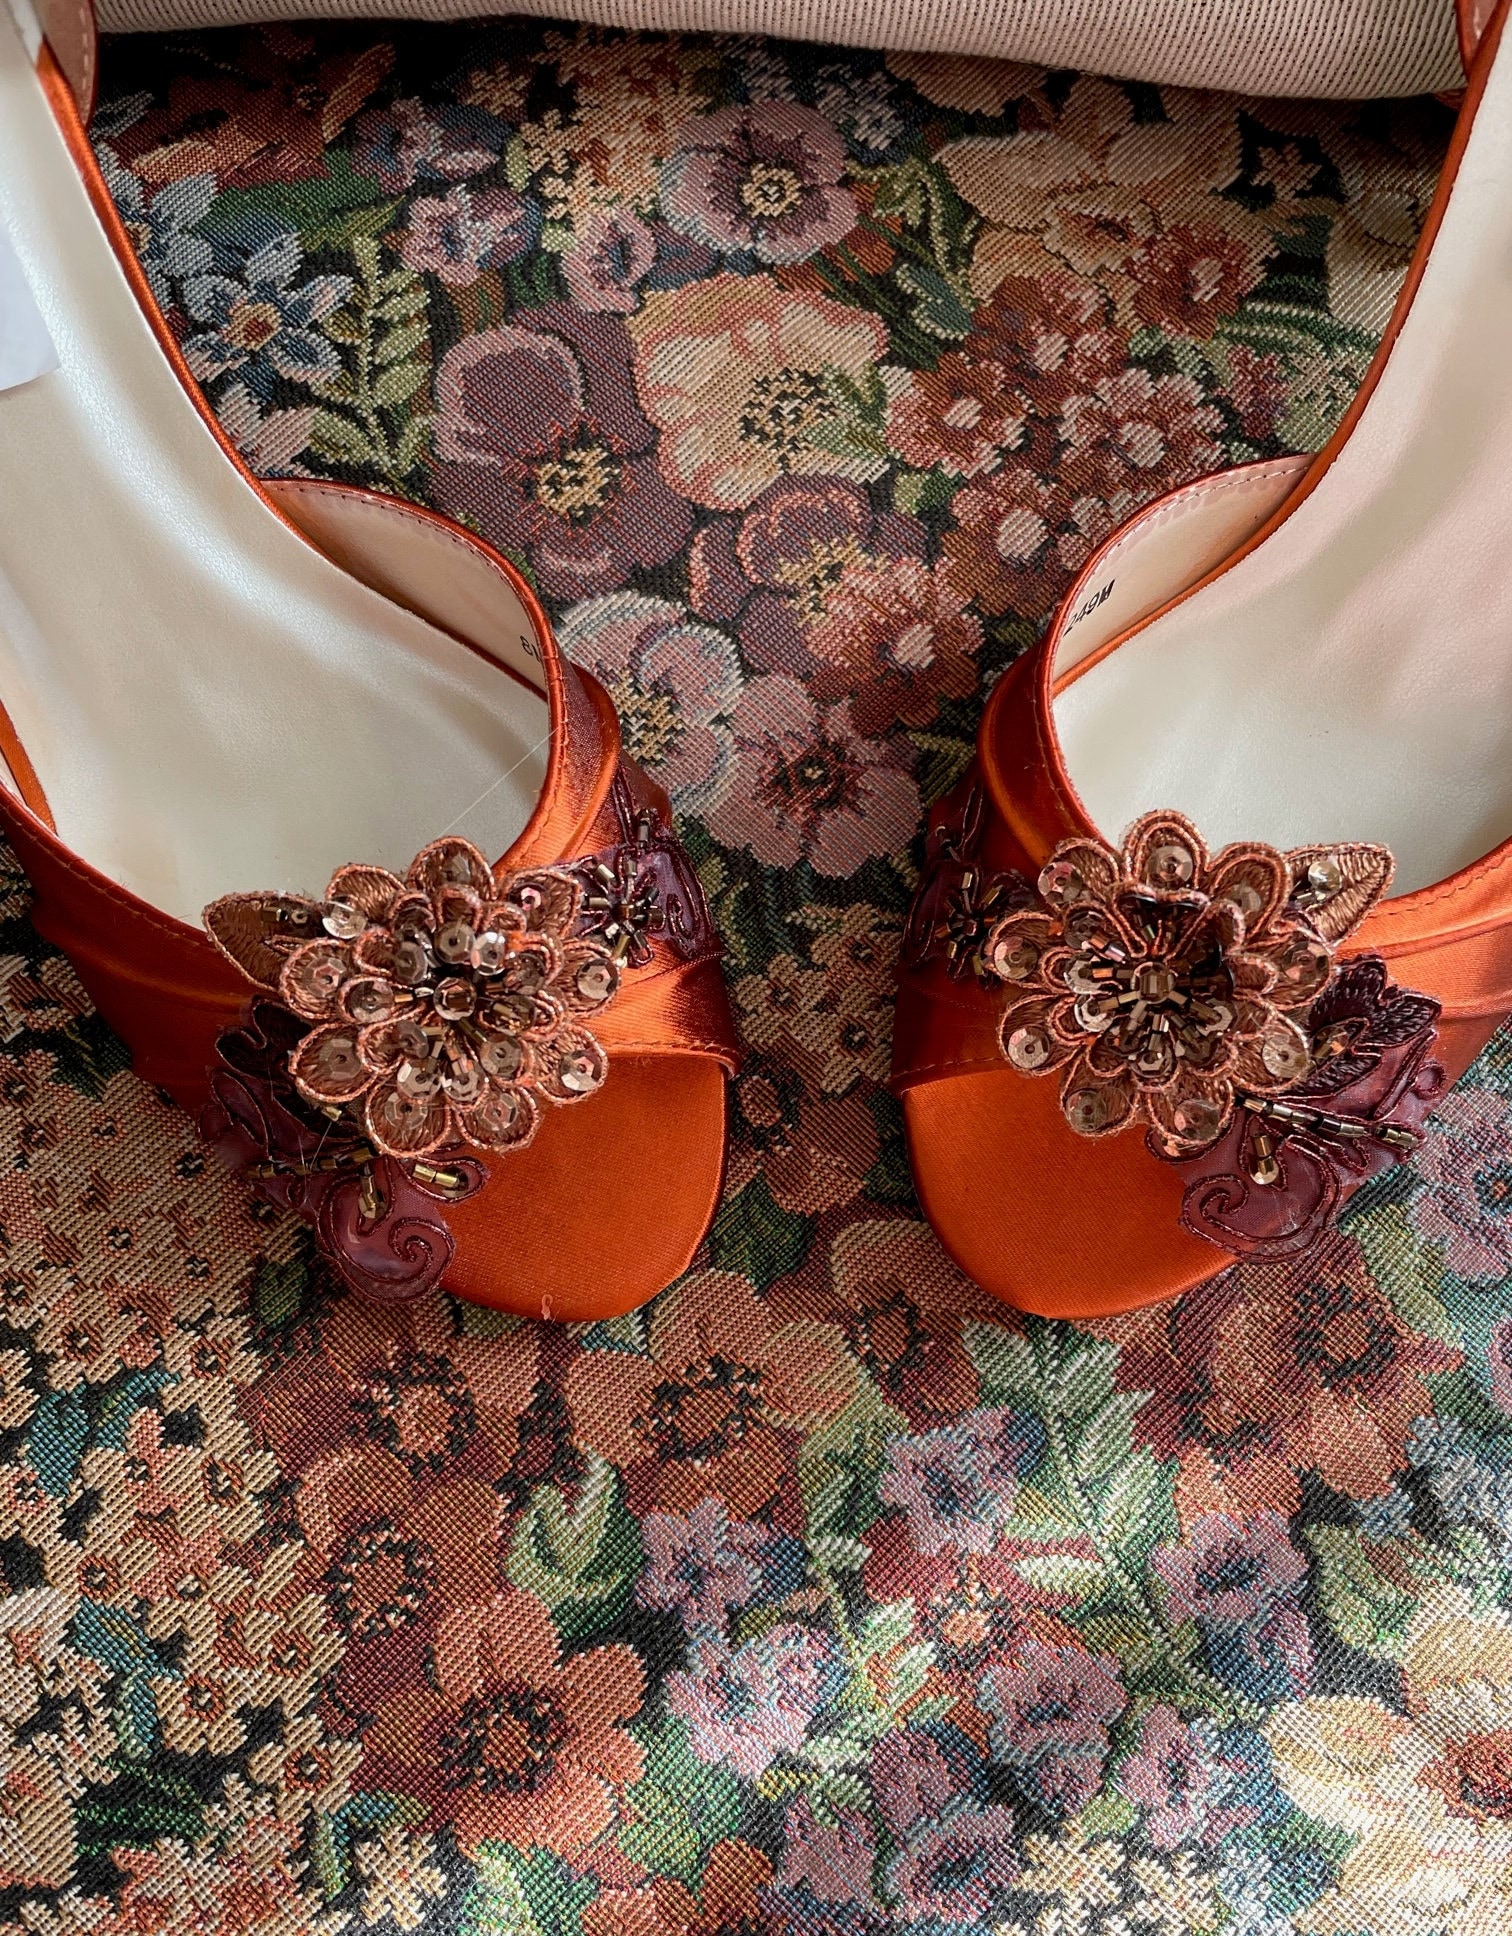 Burnt Orange Wedding Shoe Wedges with Gray Lace Overlay and Pearl Accents | Orange  wedding shoes, Wedge wedding shoes, Custom wedding shoes